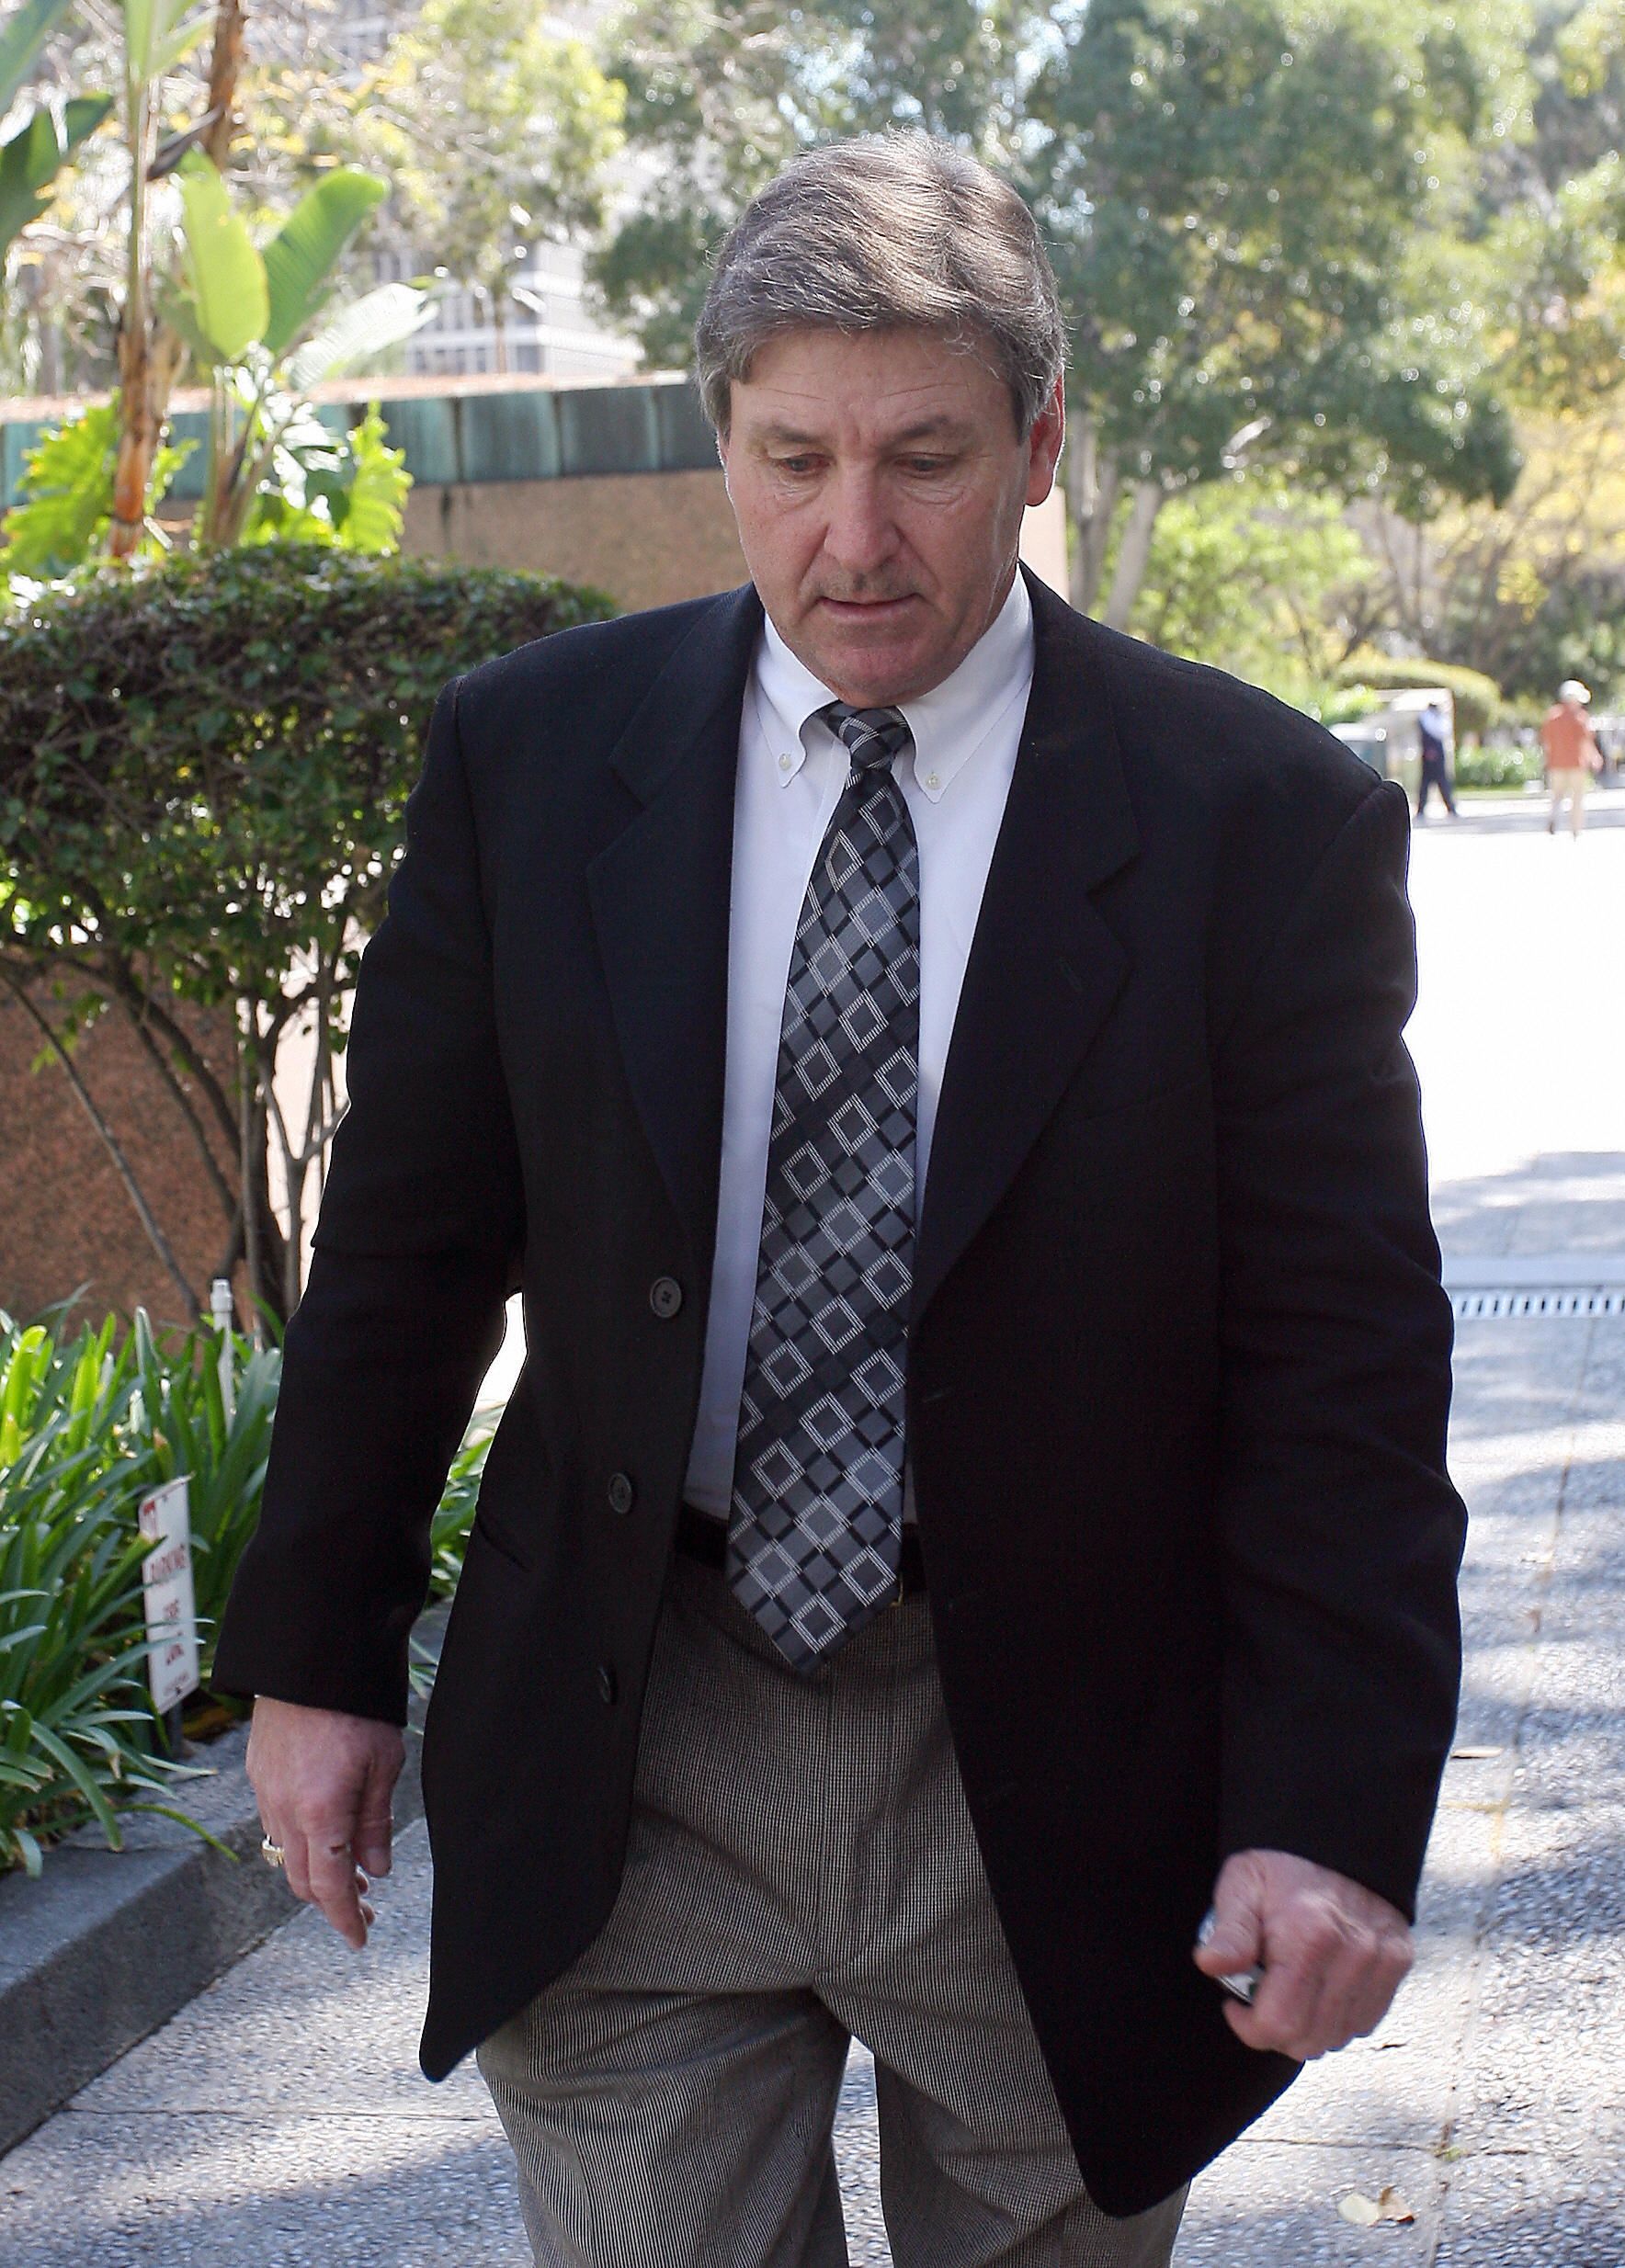 Britney Spears' father, Jamie Spears leaves the Los Angeles County Superior courthouse on March 10, 2008 | Photo: Getty Images